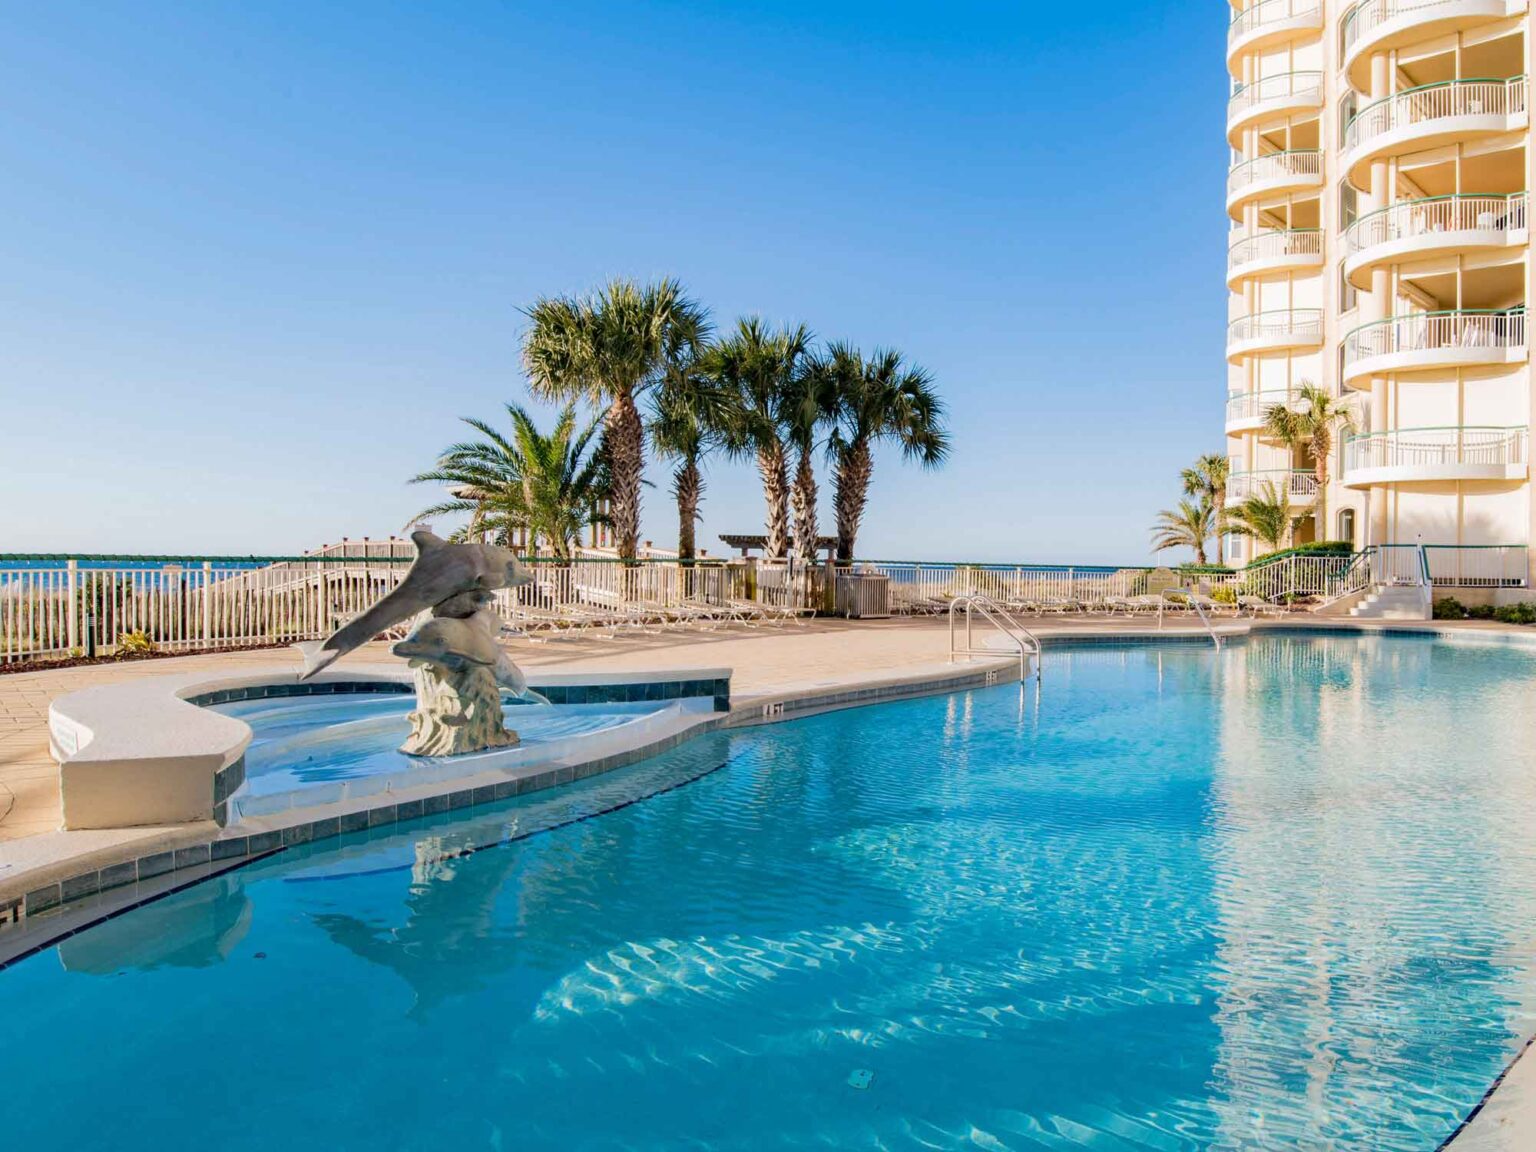 Beach Colony Resort Navarre Beach Save Money With Our 1 Insider Tip